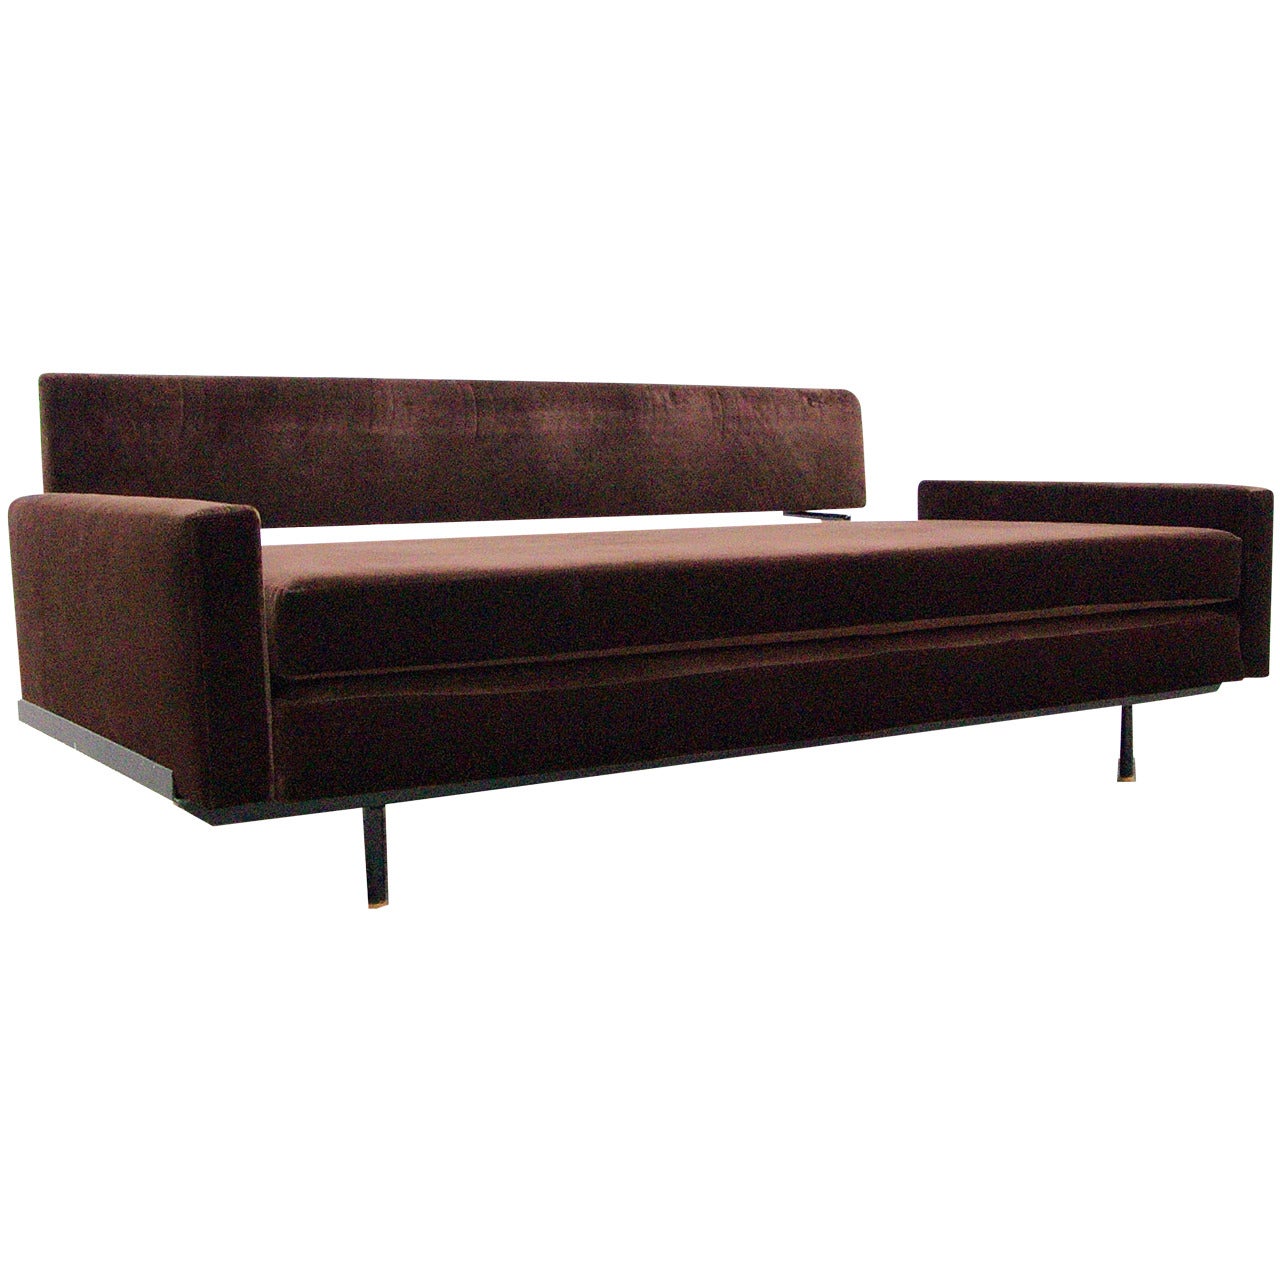 Sofa Daybed by Florence Knoll International, Mid-Century Modern Design, 1956